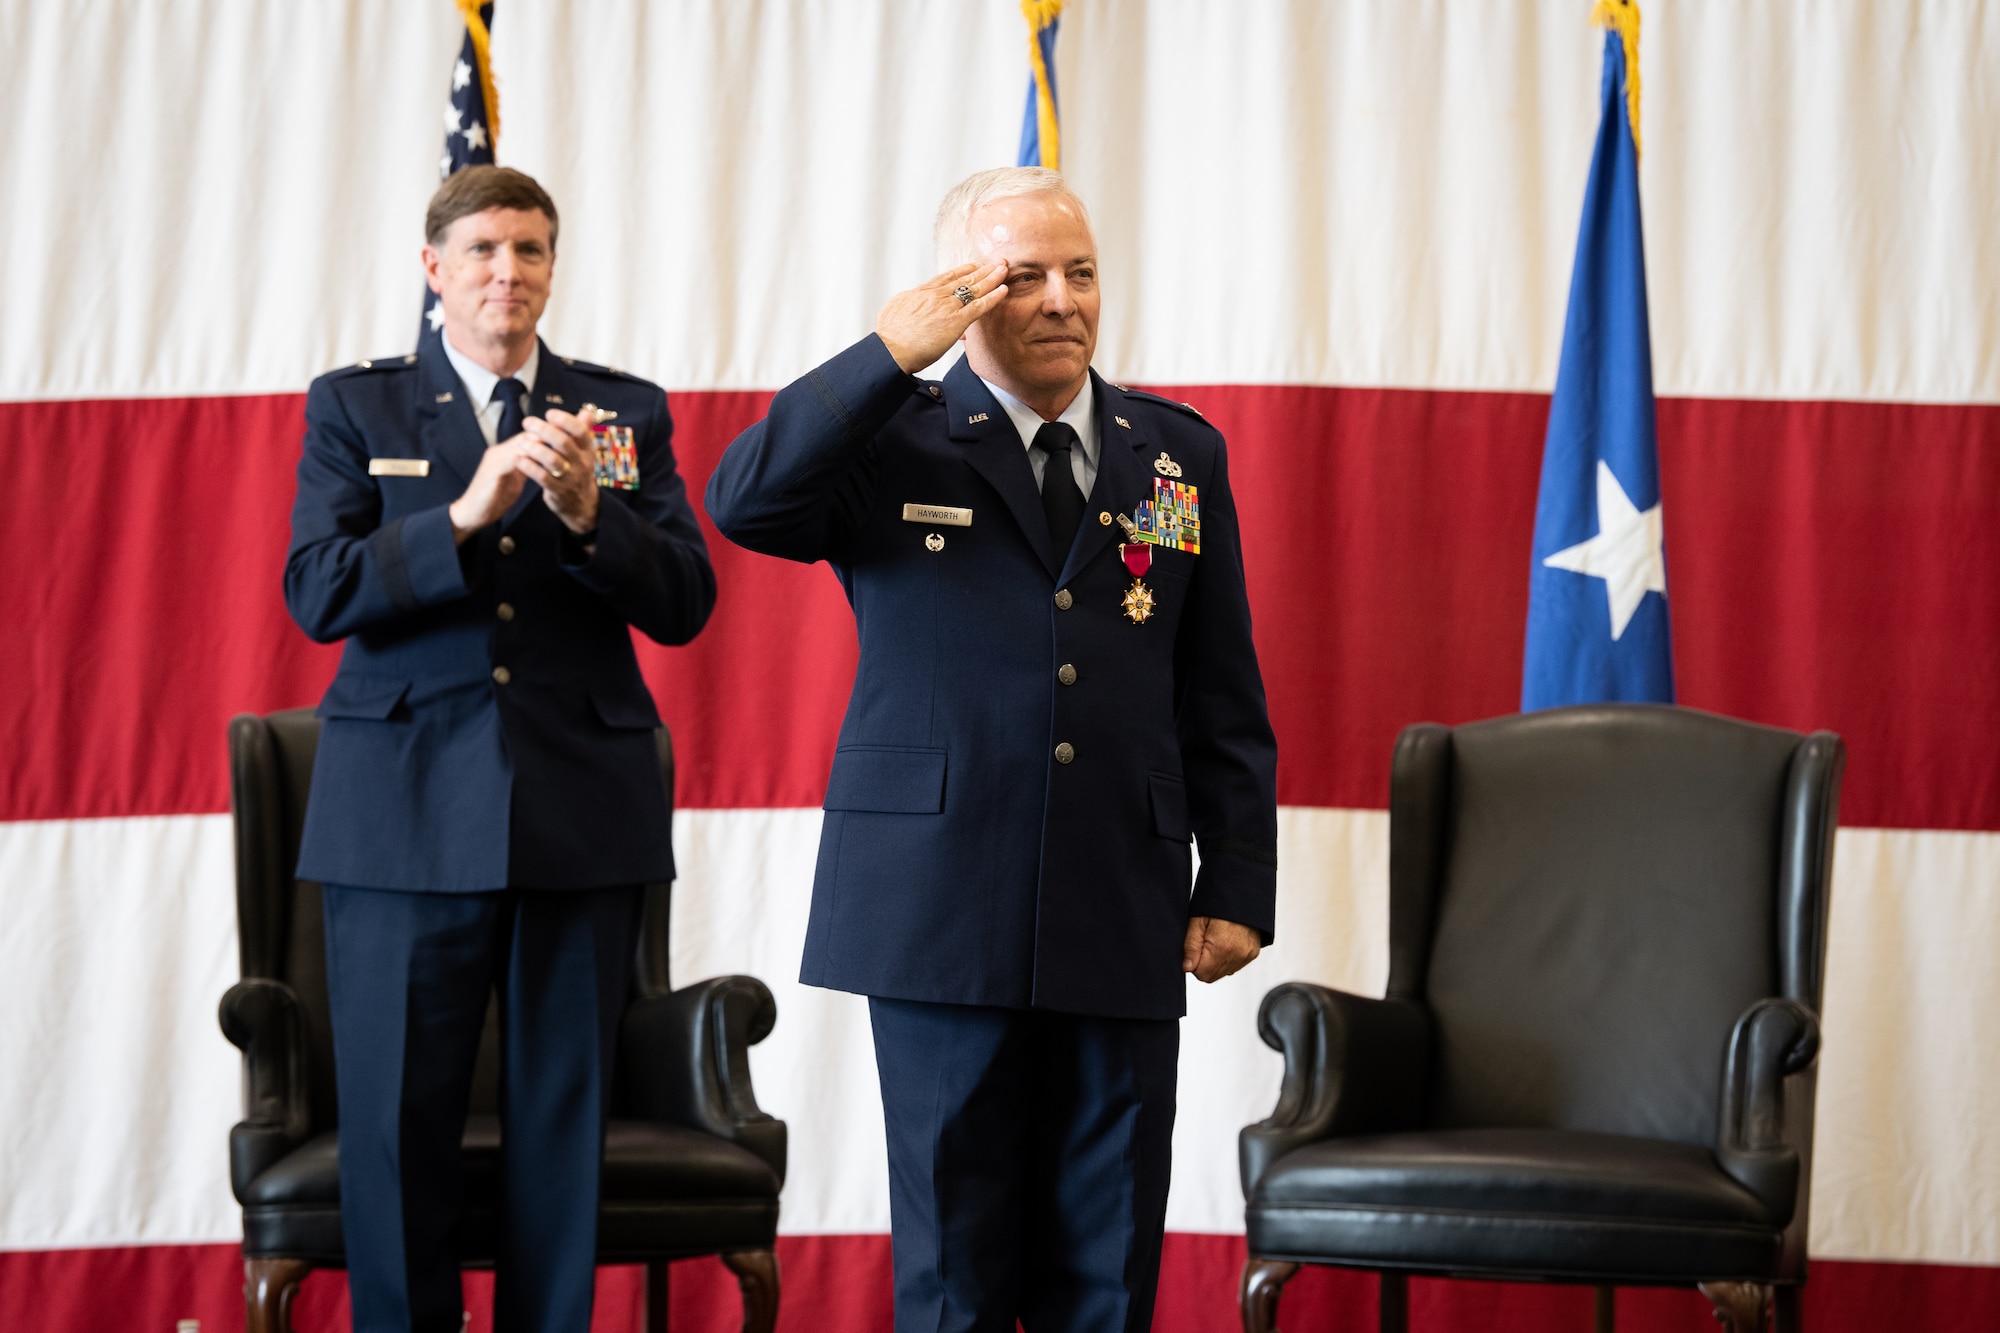 Col. Douglas D. Hayworth, 137th Special Operations Wing (137th SOW) vice commander, renders his final salute to members of the 137th SOW during his retirement ceremony at Will Rogers Air National Guard Base in Oklahoma City, May 4, 2018. Hayworth retired after serving more than 30 years with the Wing. (U.S. Air National Guard Photo by Senior Airman Jordan Martin)